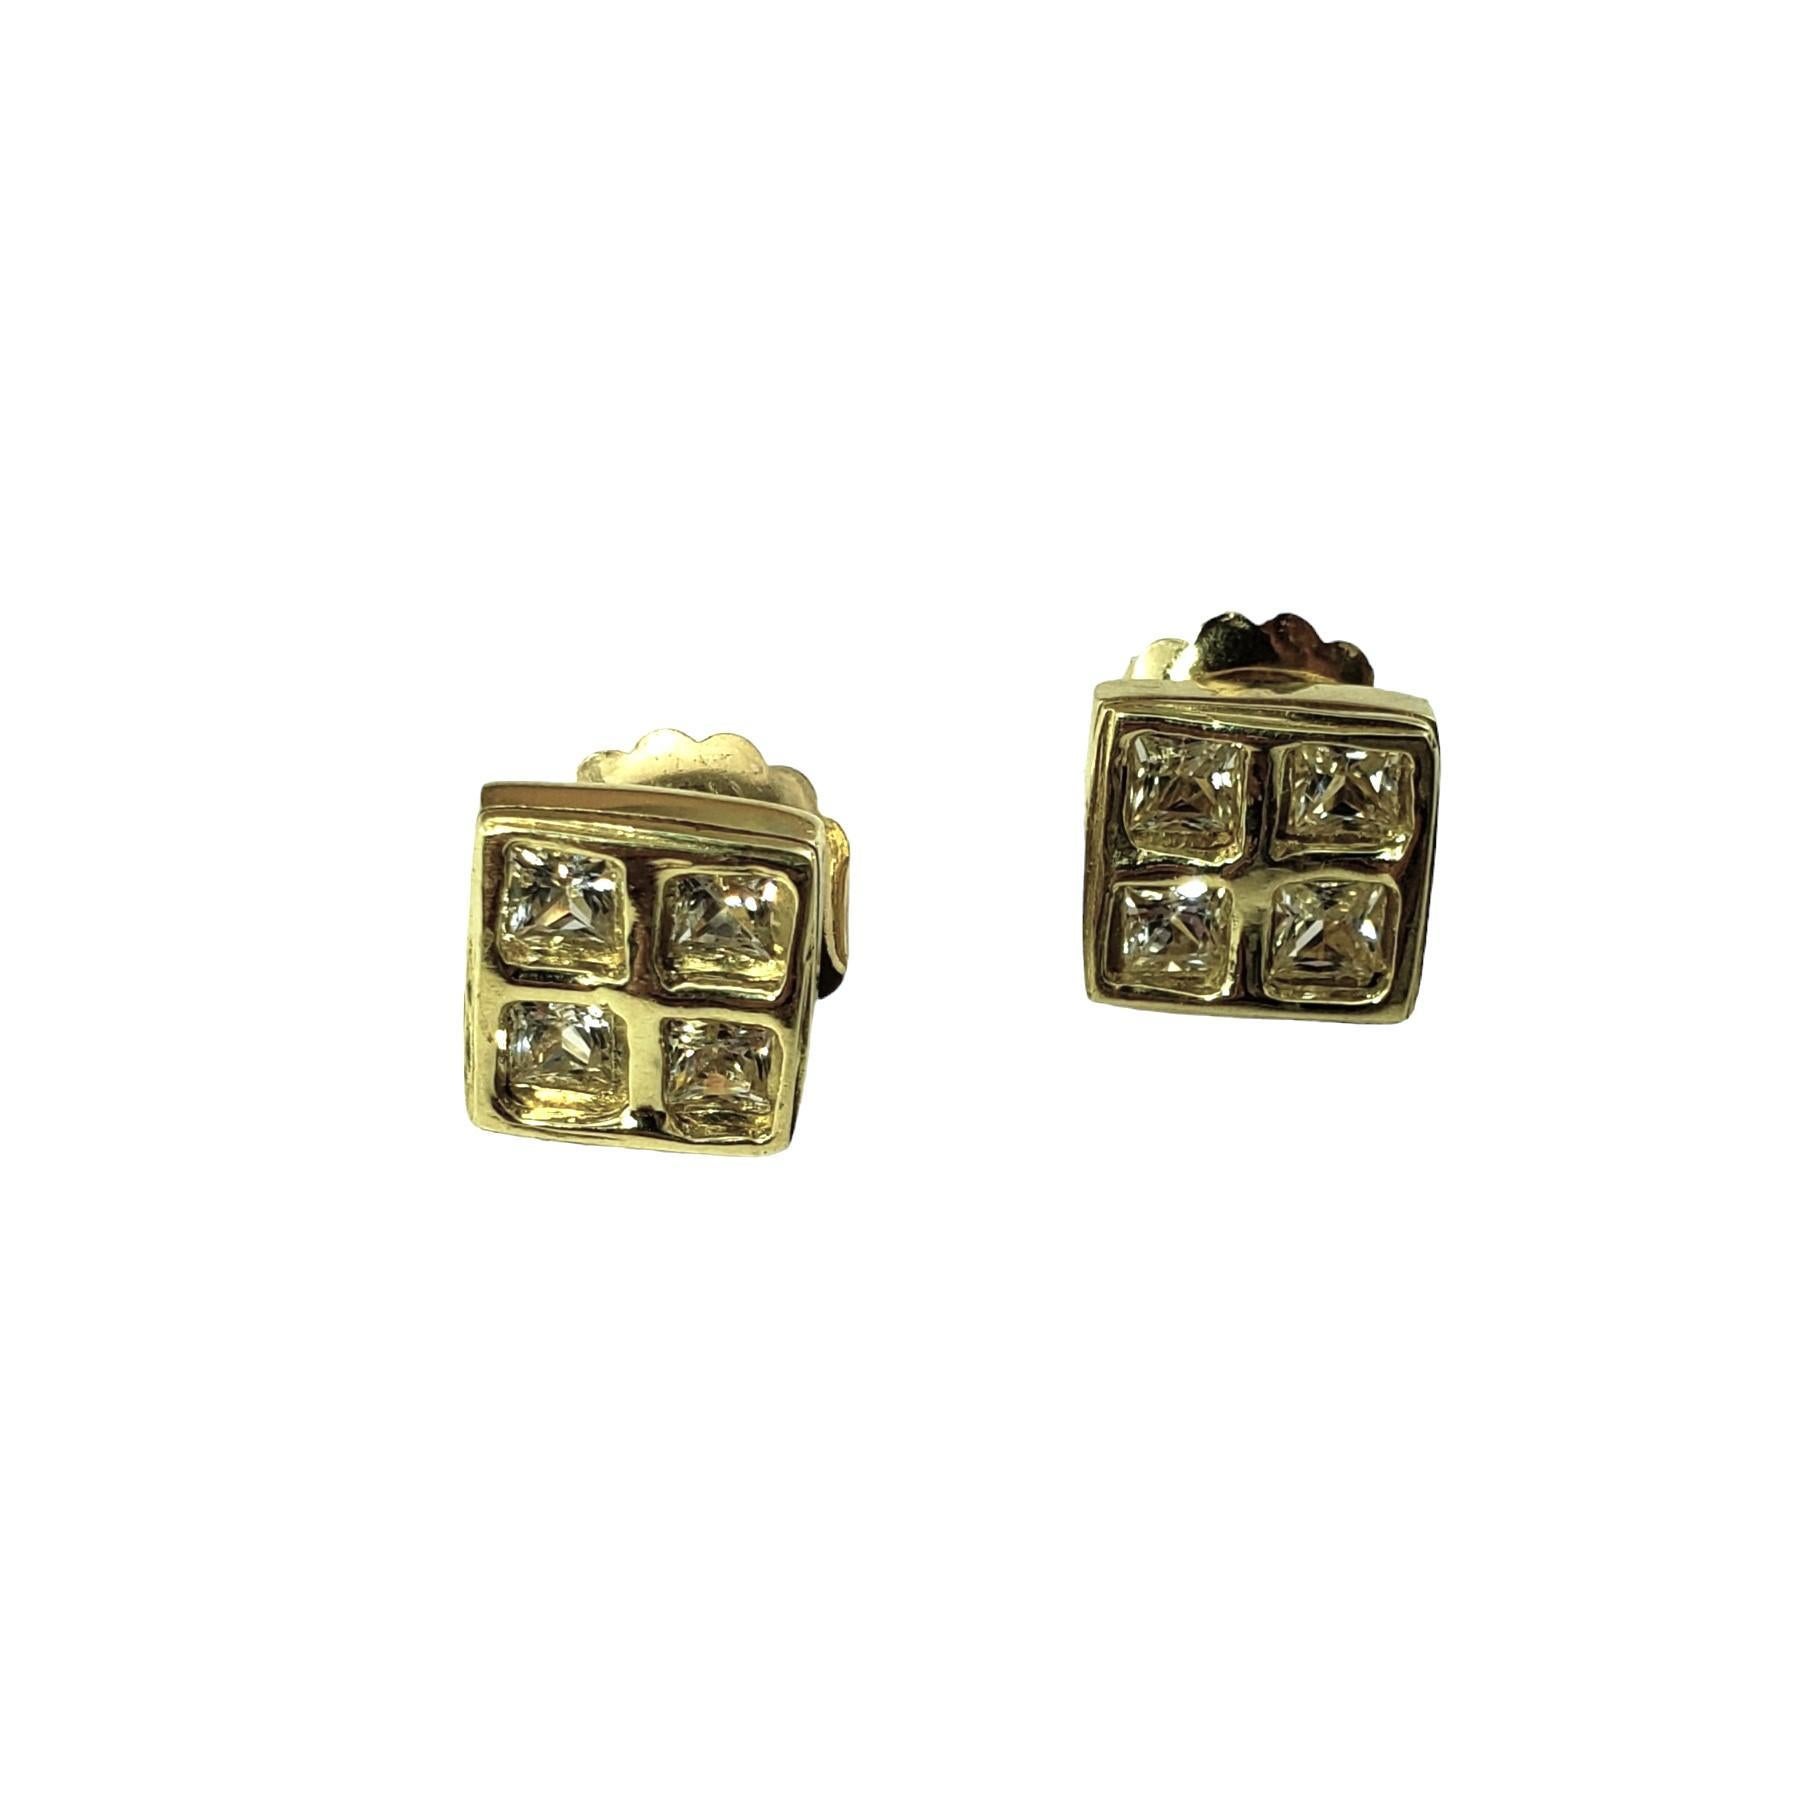 Robin Rotenier 18K Yellow Gold White Sapphire Earrings #15413 In Good Condition For Sale In Washington Depot, CT